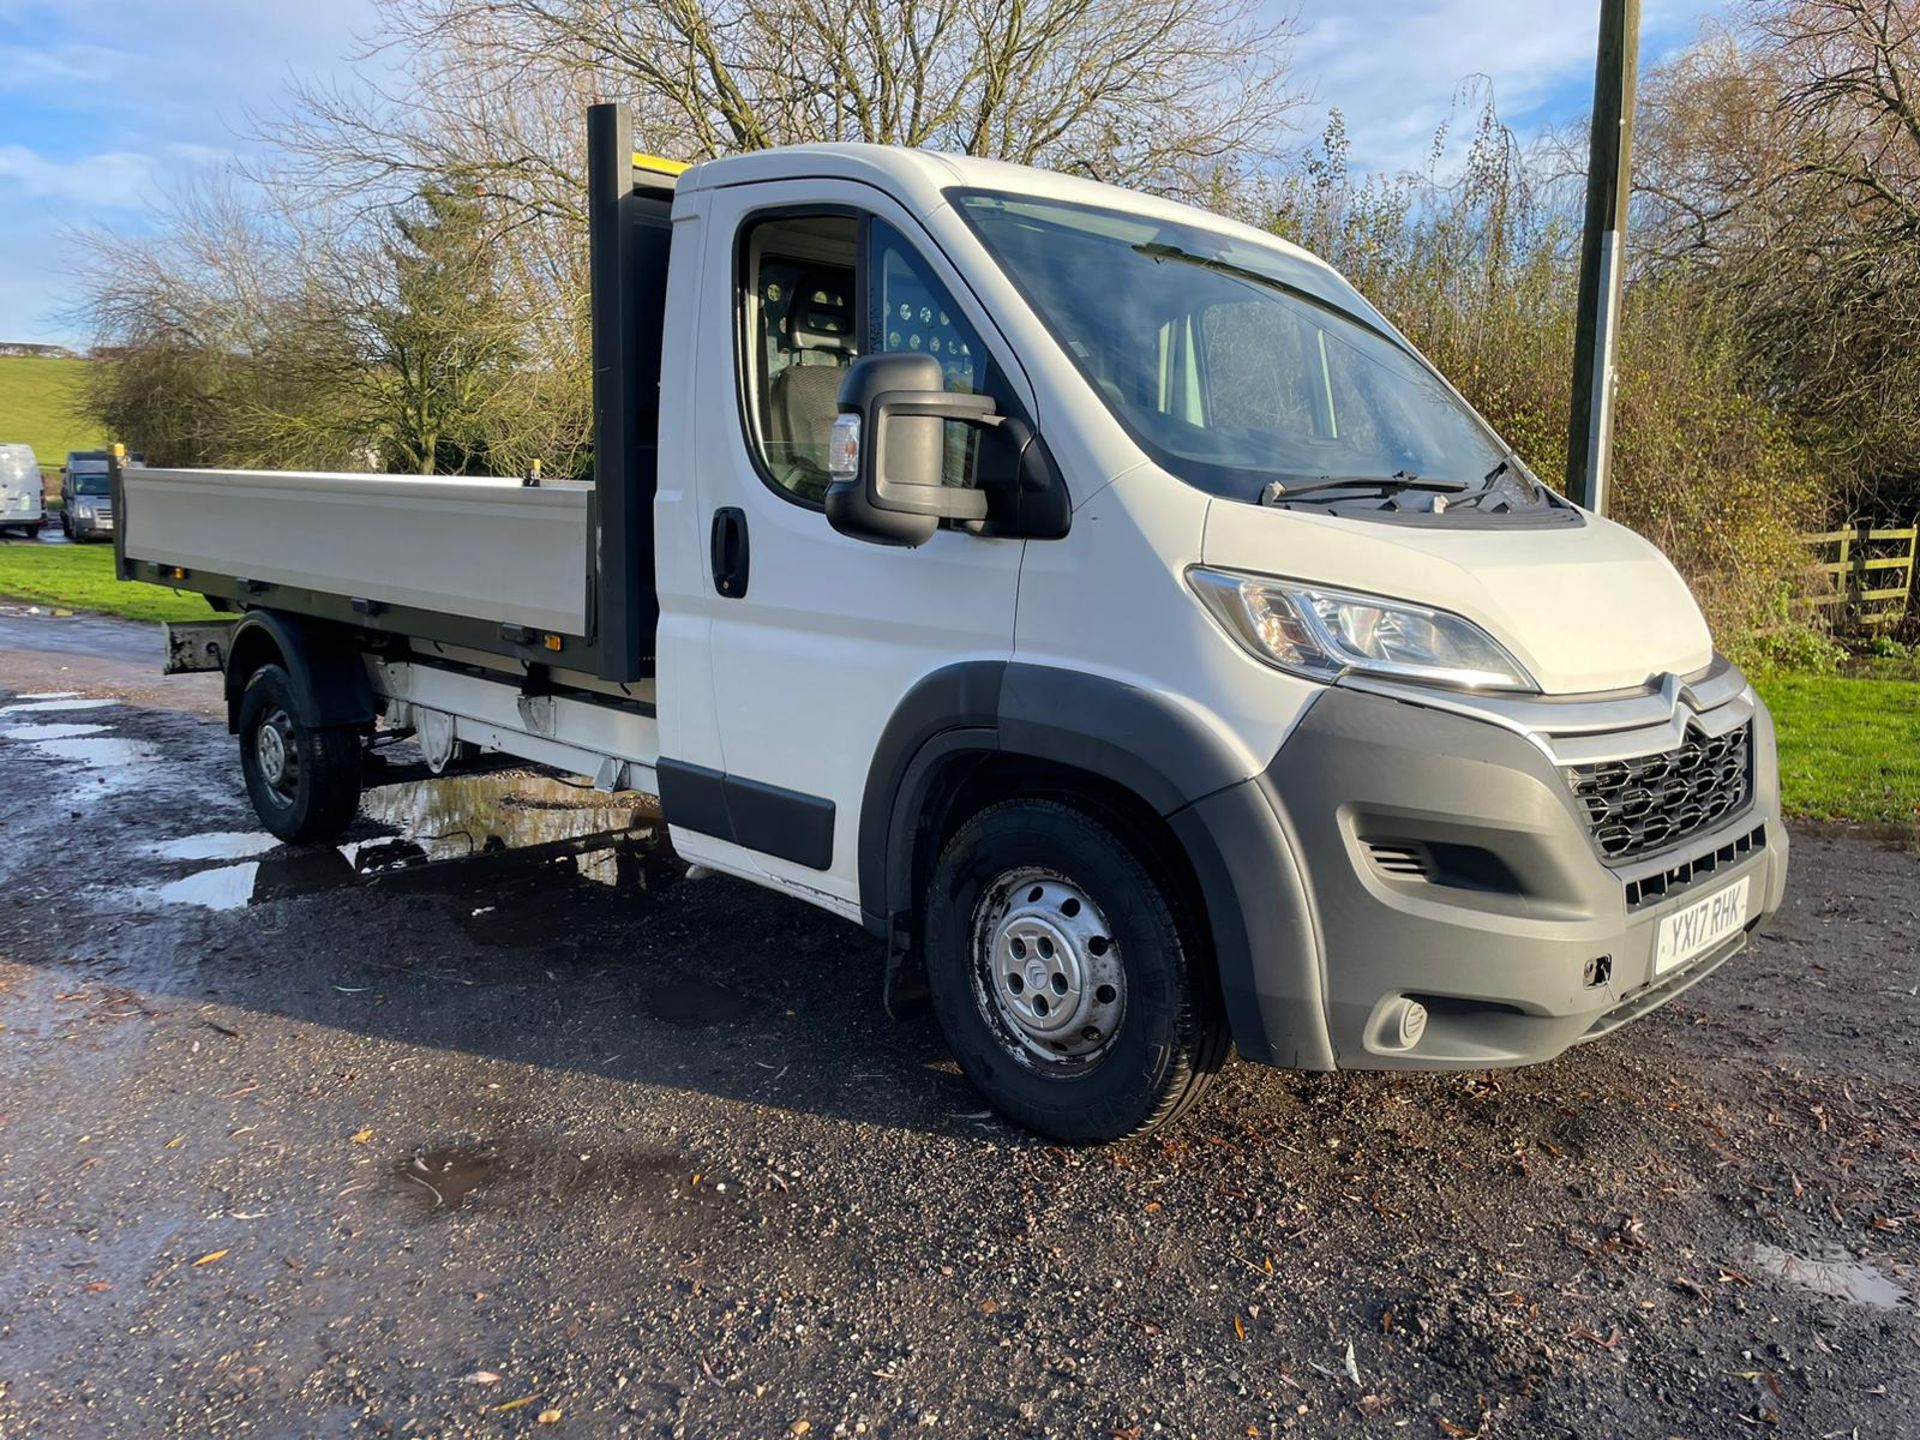 2017 CITROEN RELAY 35 HEAVY L4 HDI WHITE CHASSIS CAB *NO VAT*